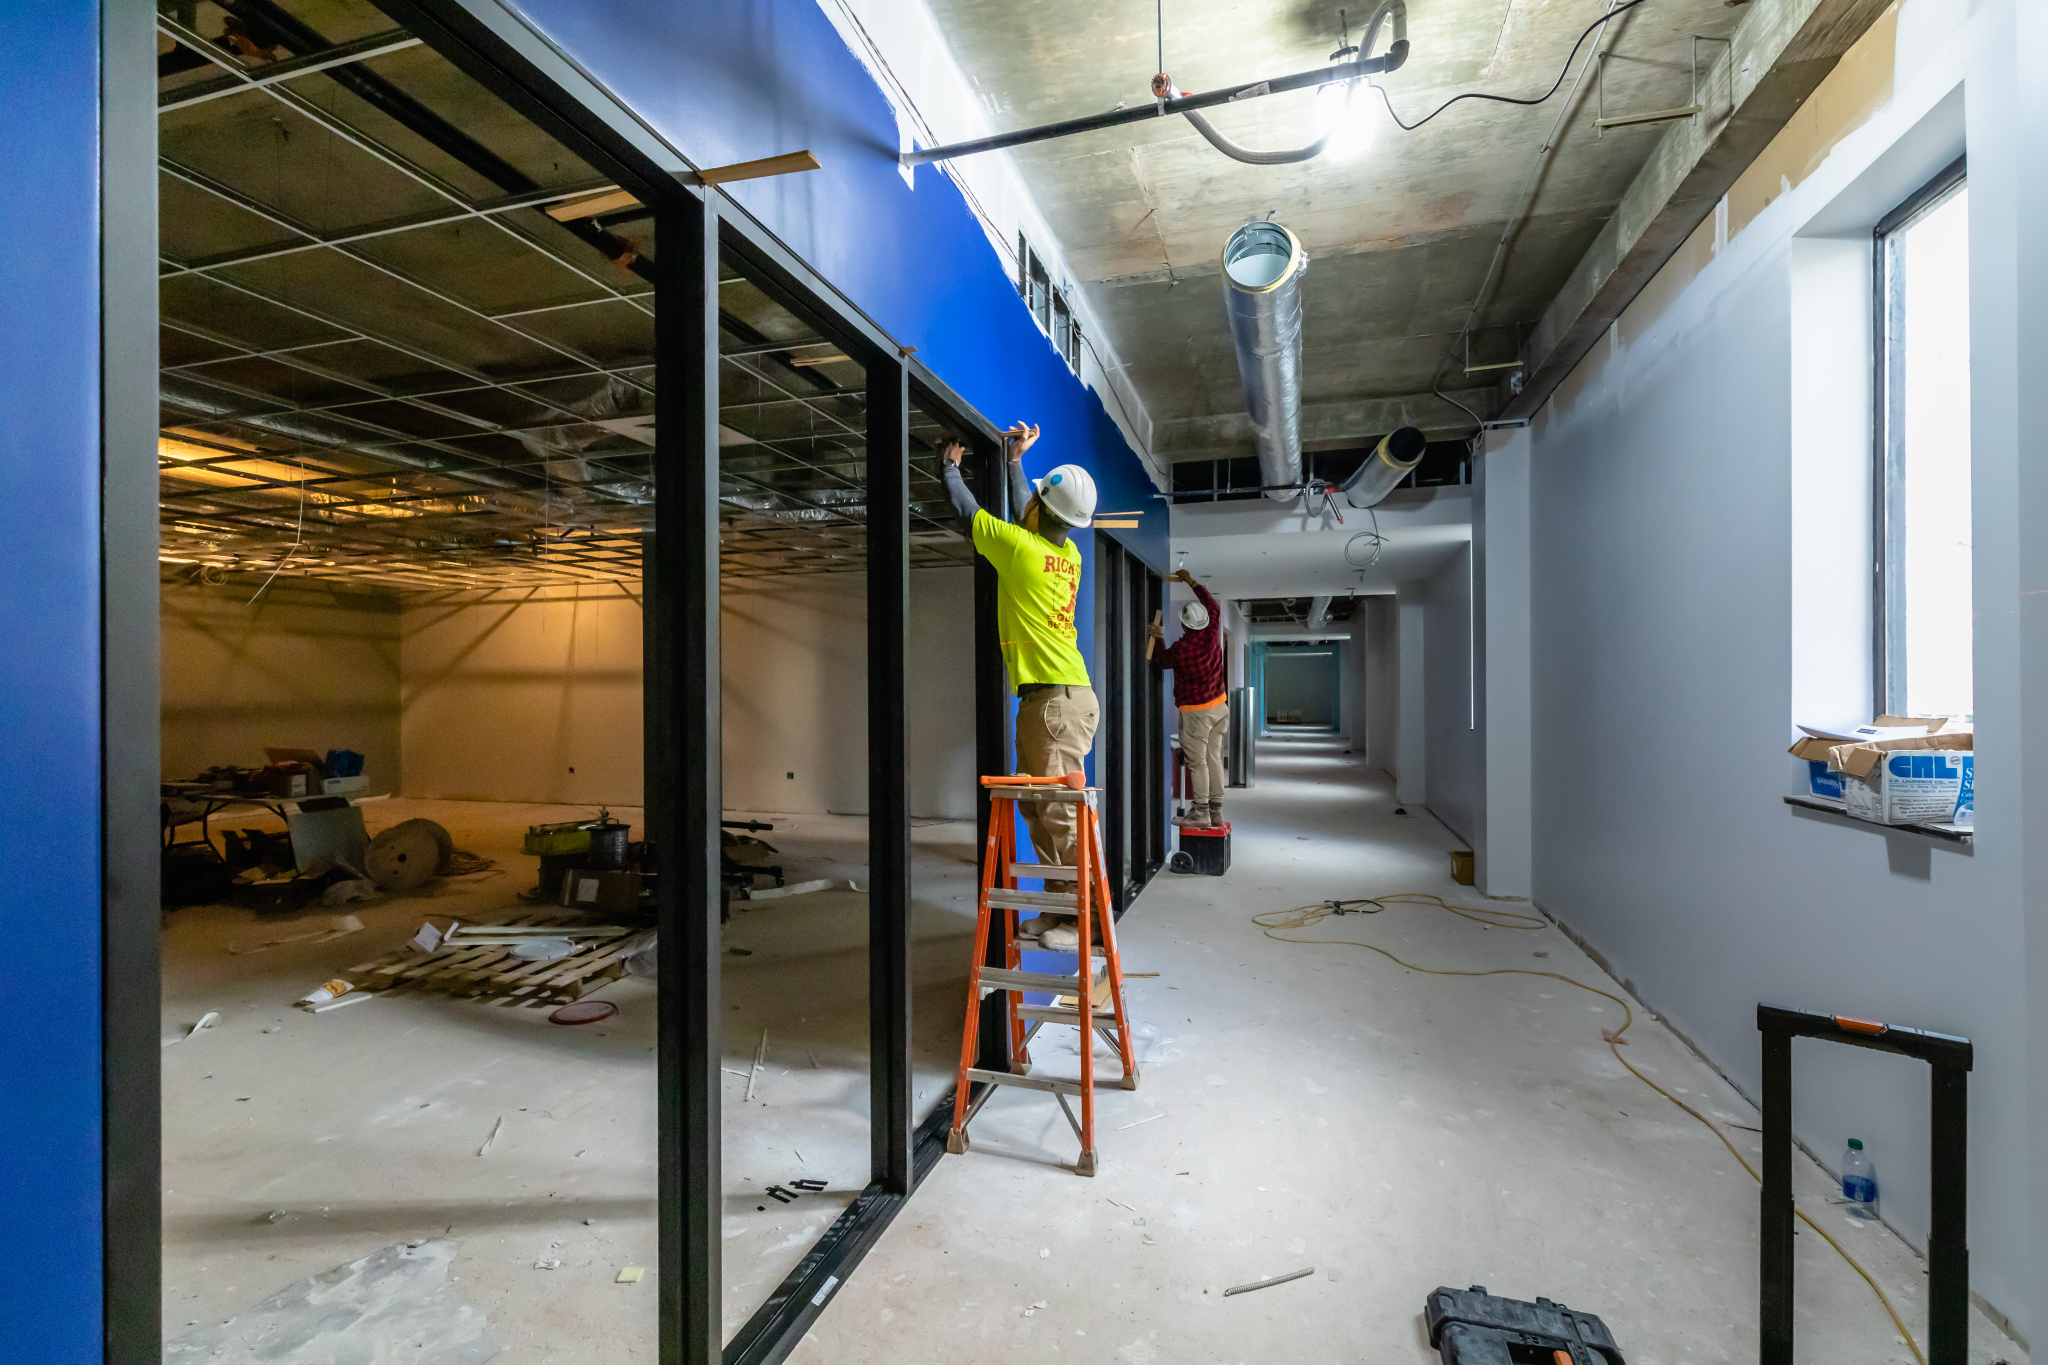 The main first floor reading room is now a blue hallway (Photo by Derek Eckenroth)